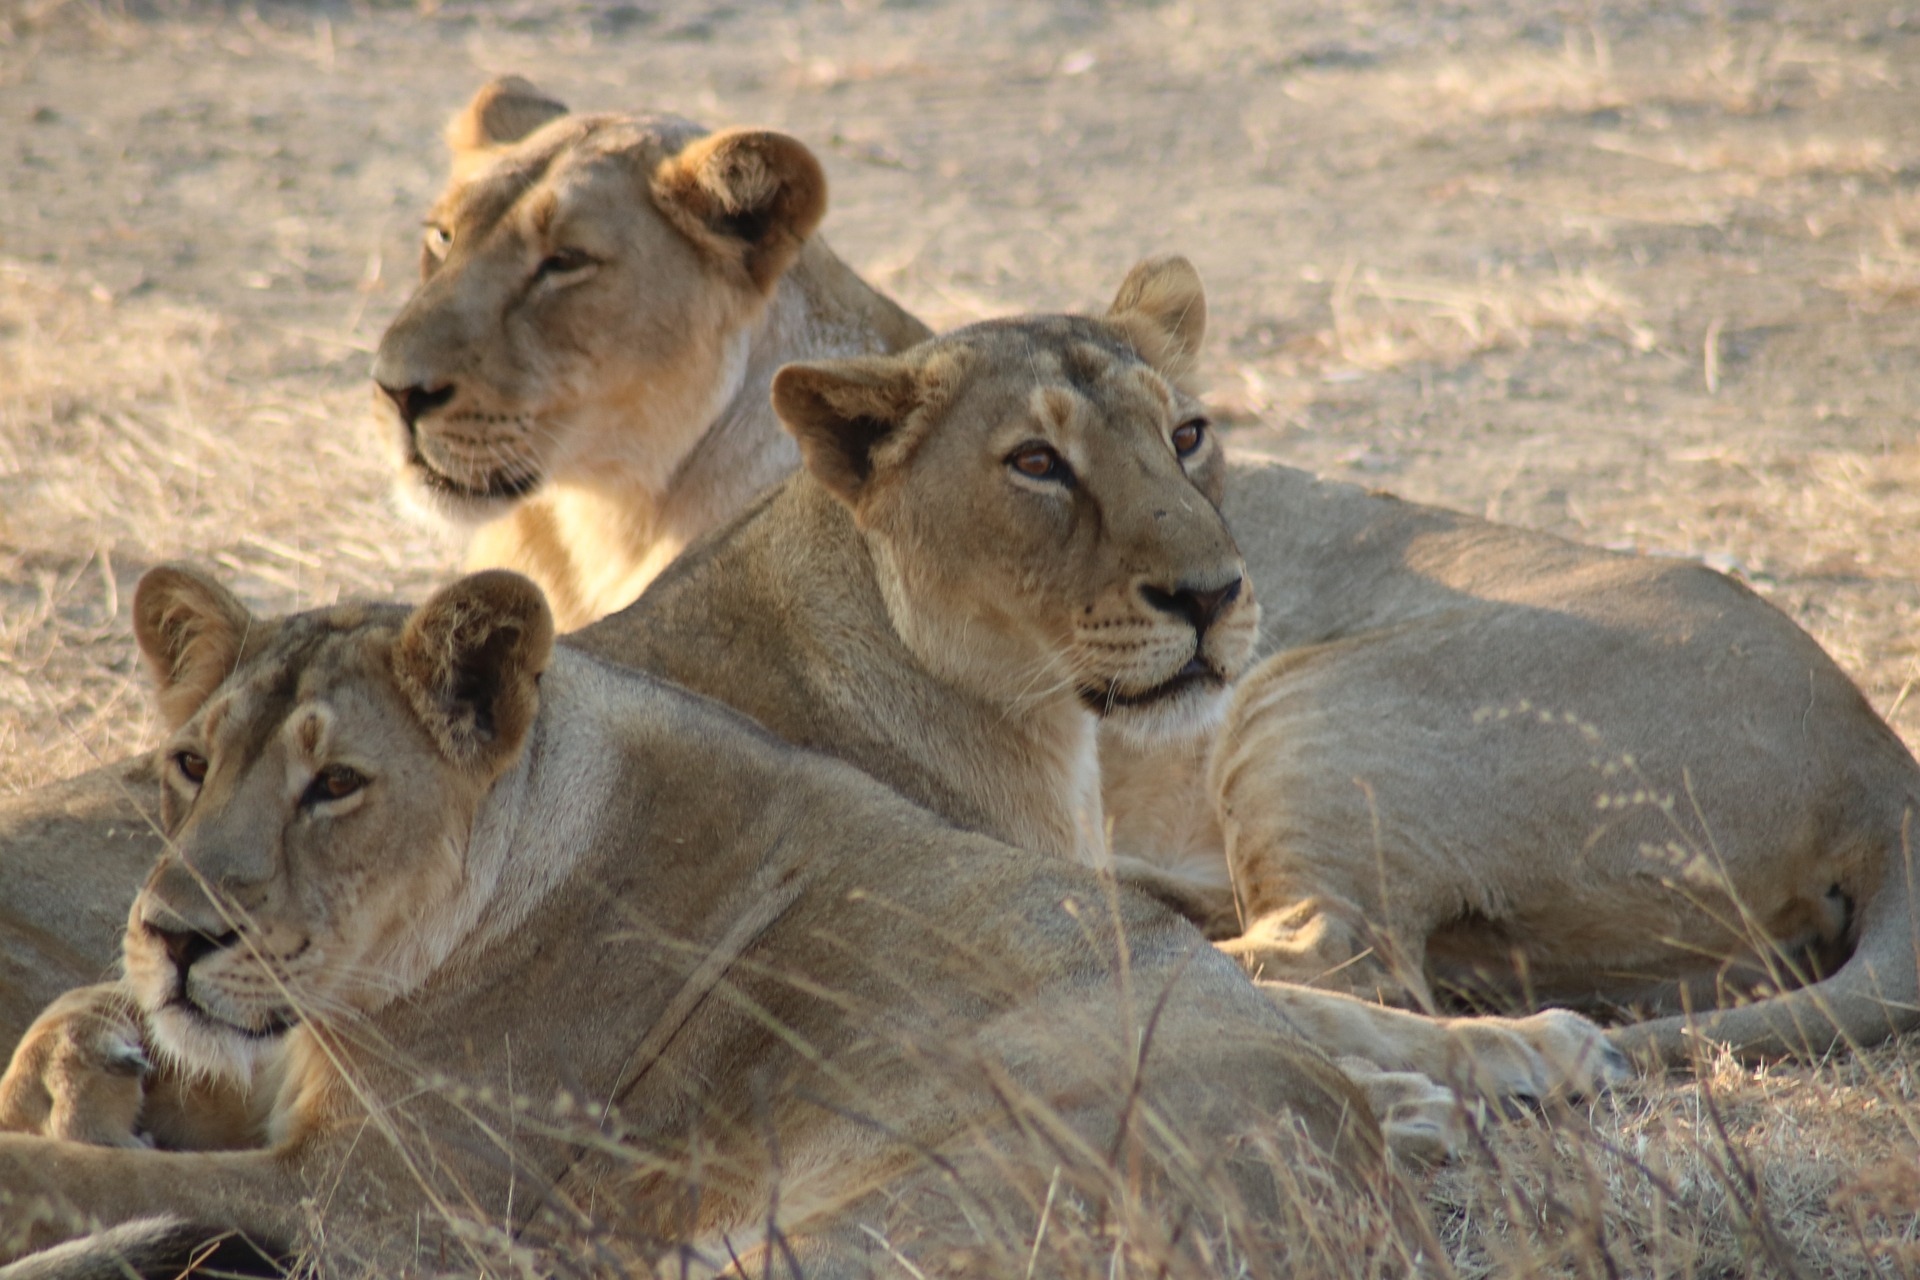 Roar of the Wild: Embark on a Thrilling Safari in Gir National Park - 3-Day Adventure